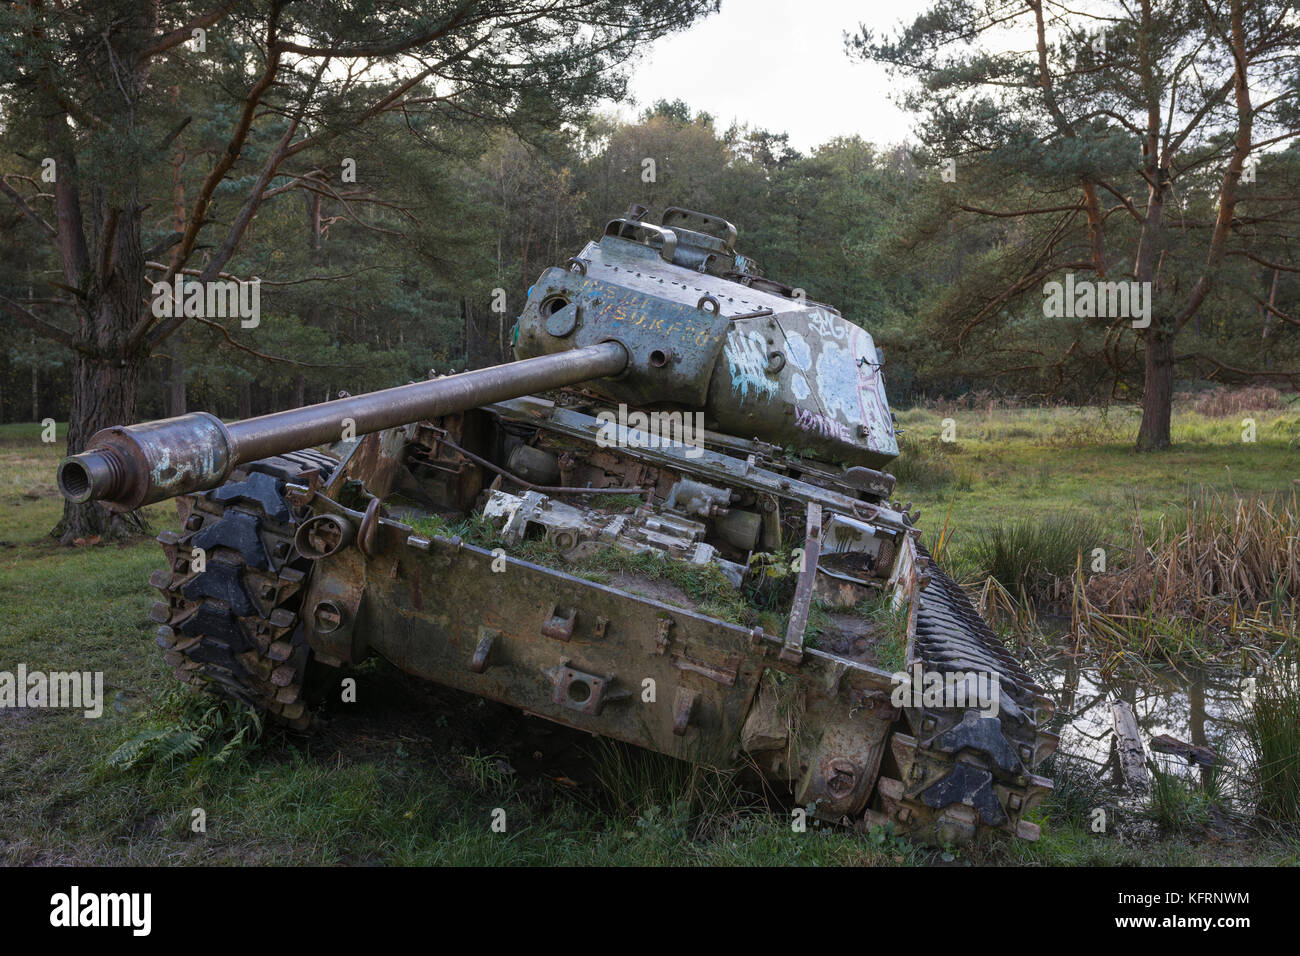 Dumped historical M47 Patton tank left behind in forest Stock Photo